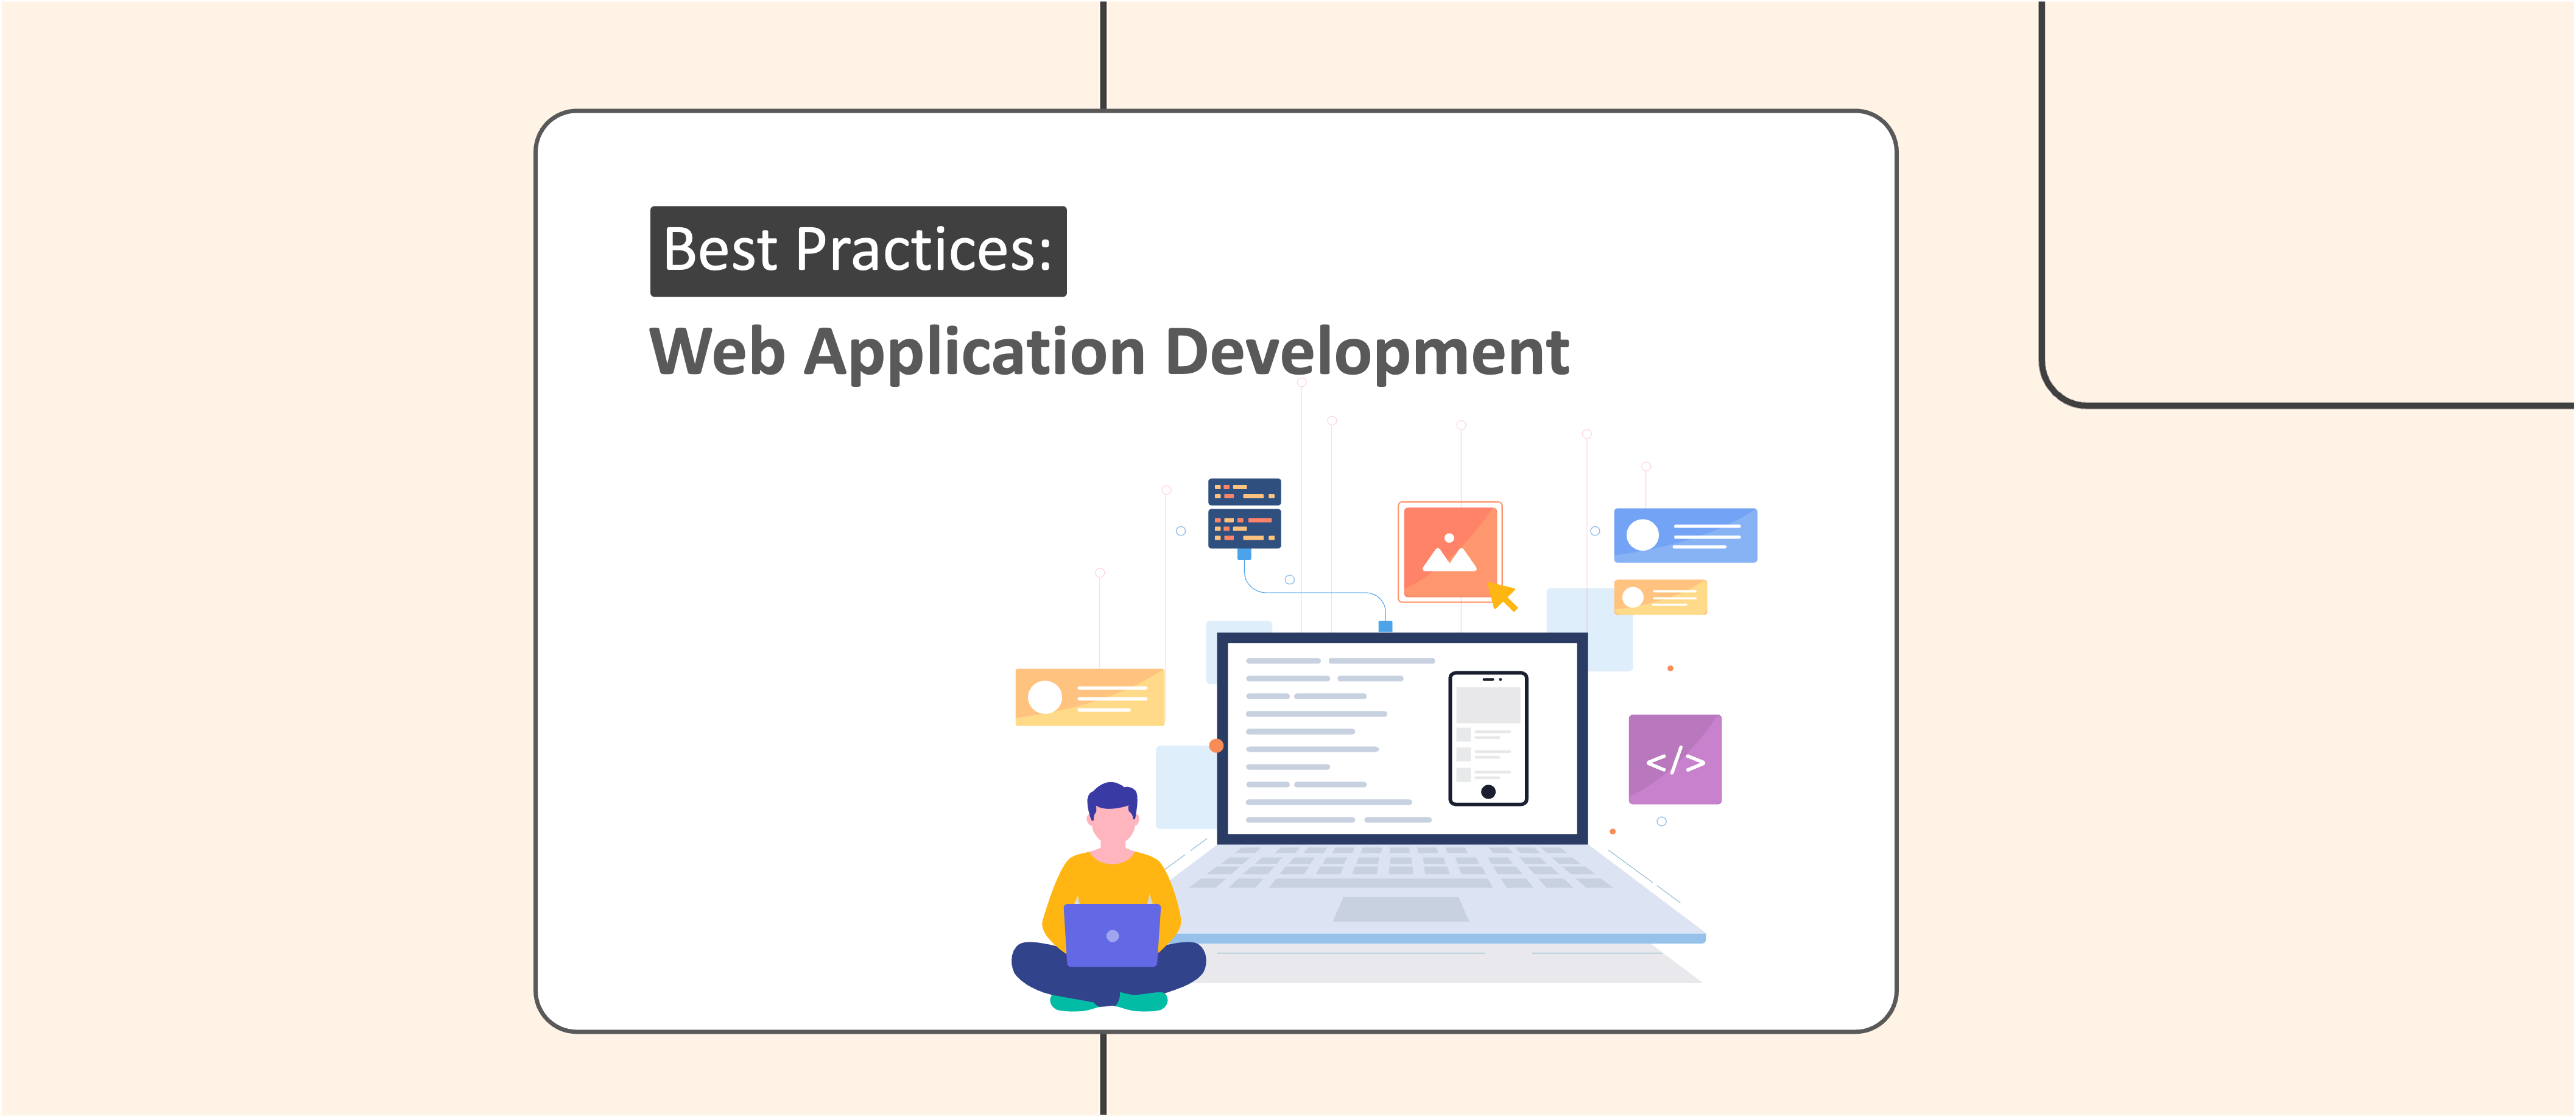 Web Application Development Best Practices You Need To Follow